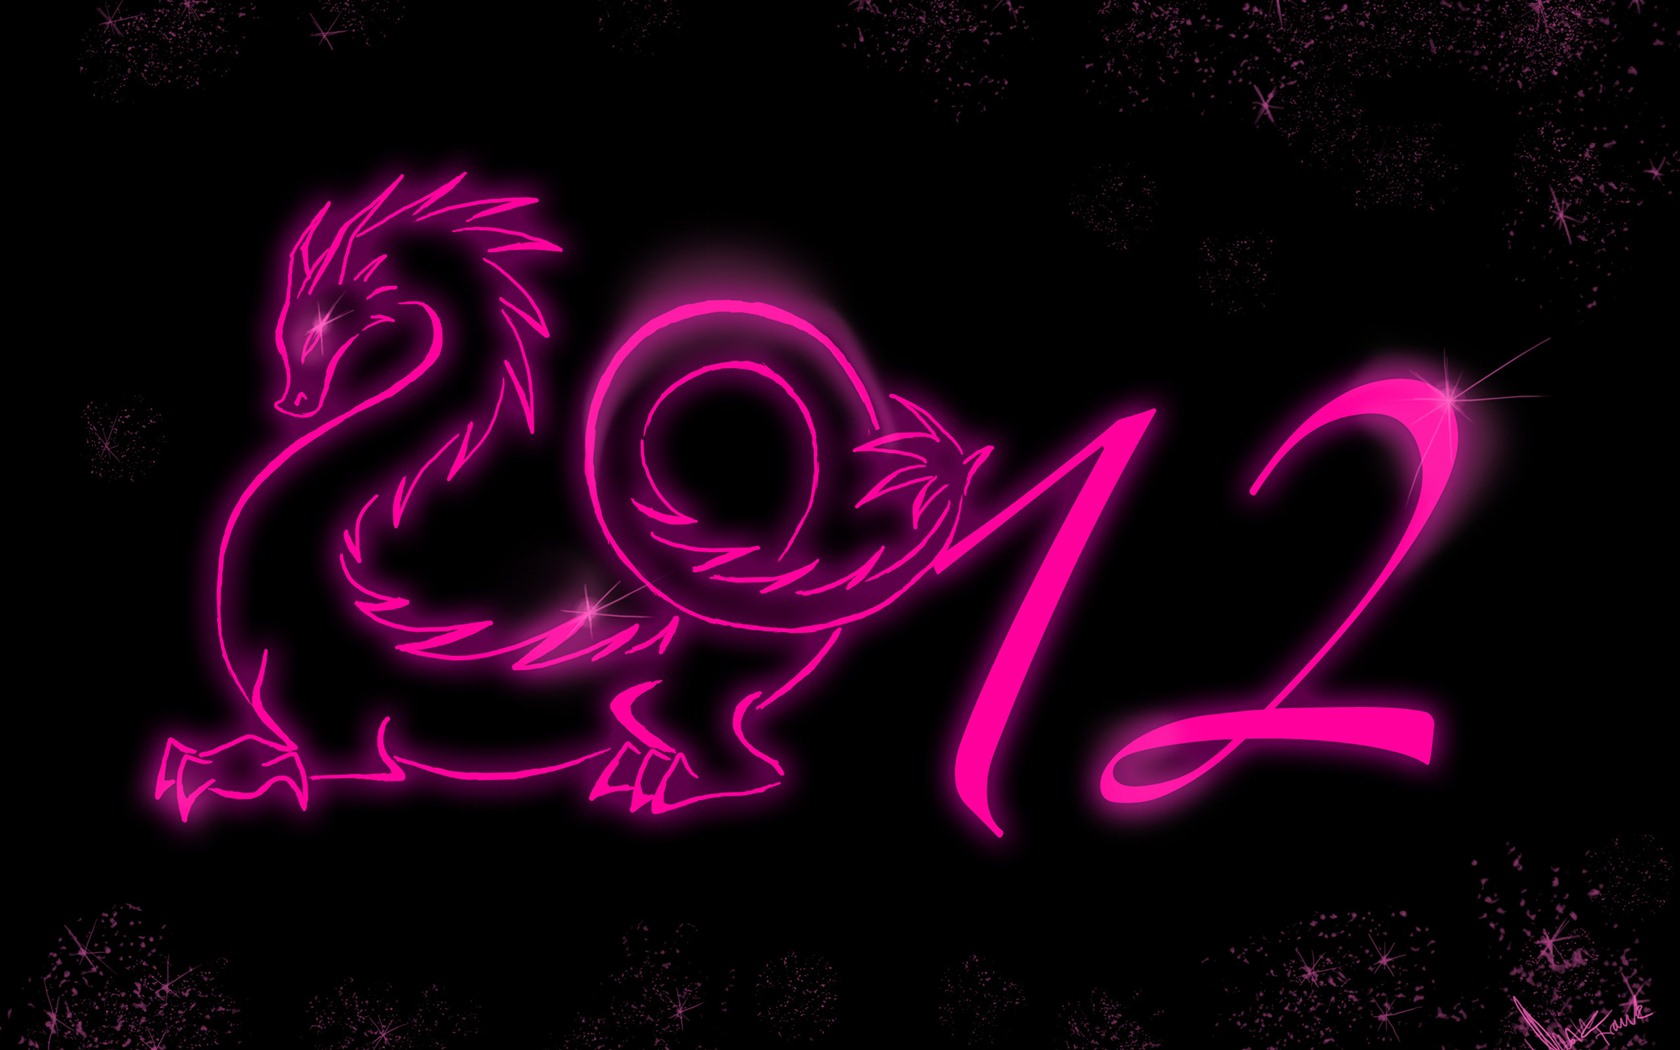 2012 New Year wallpapers (1) #16 - 1680x1050